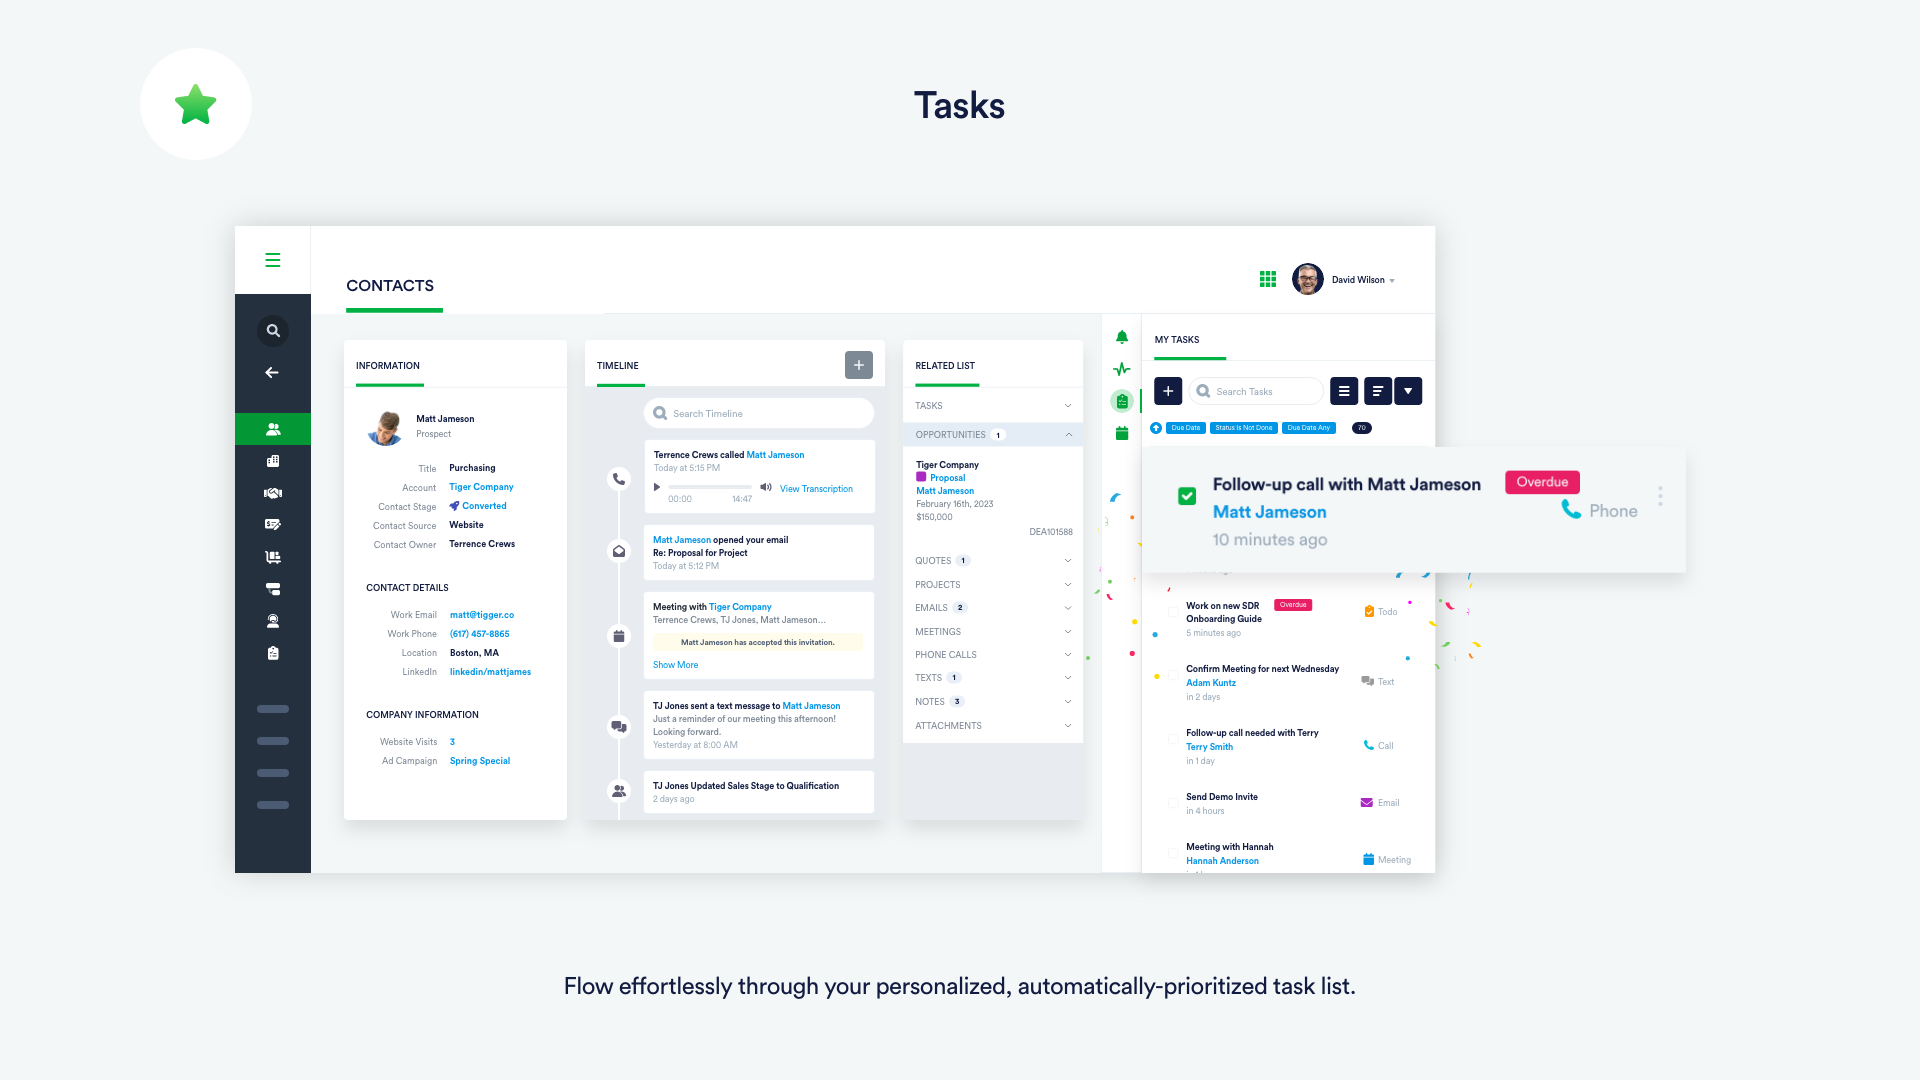 Flow effortlessly through your personalized, automatically-prioritized task list.